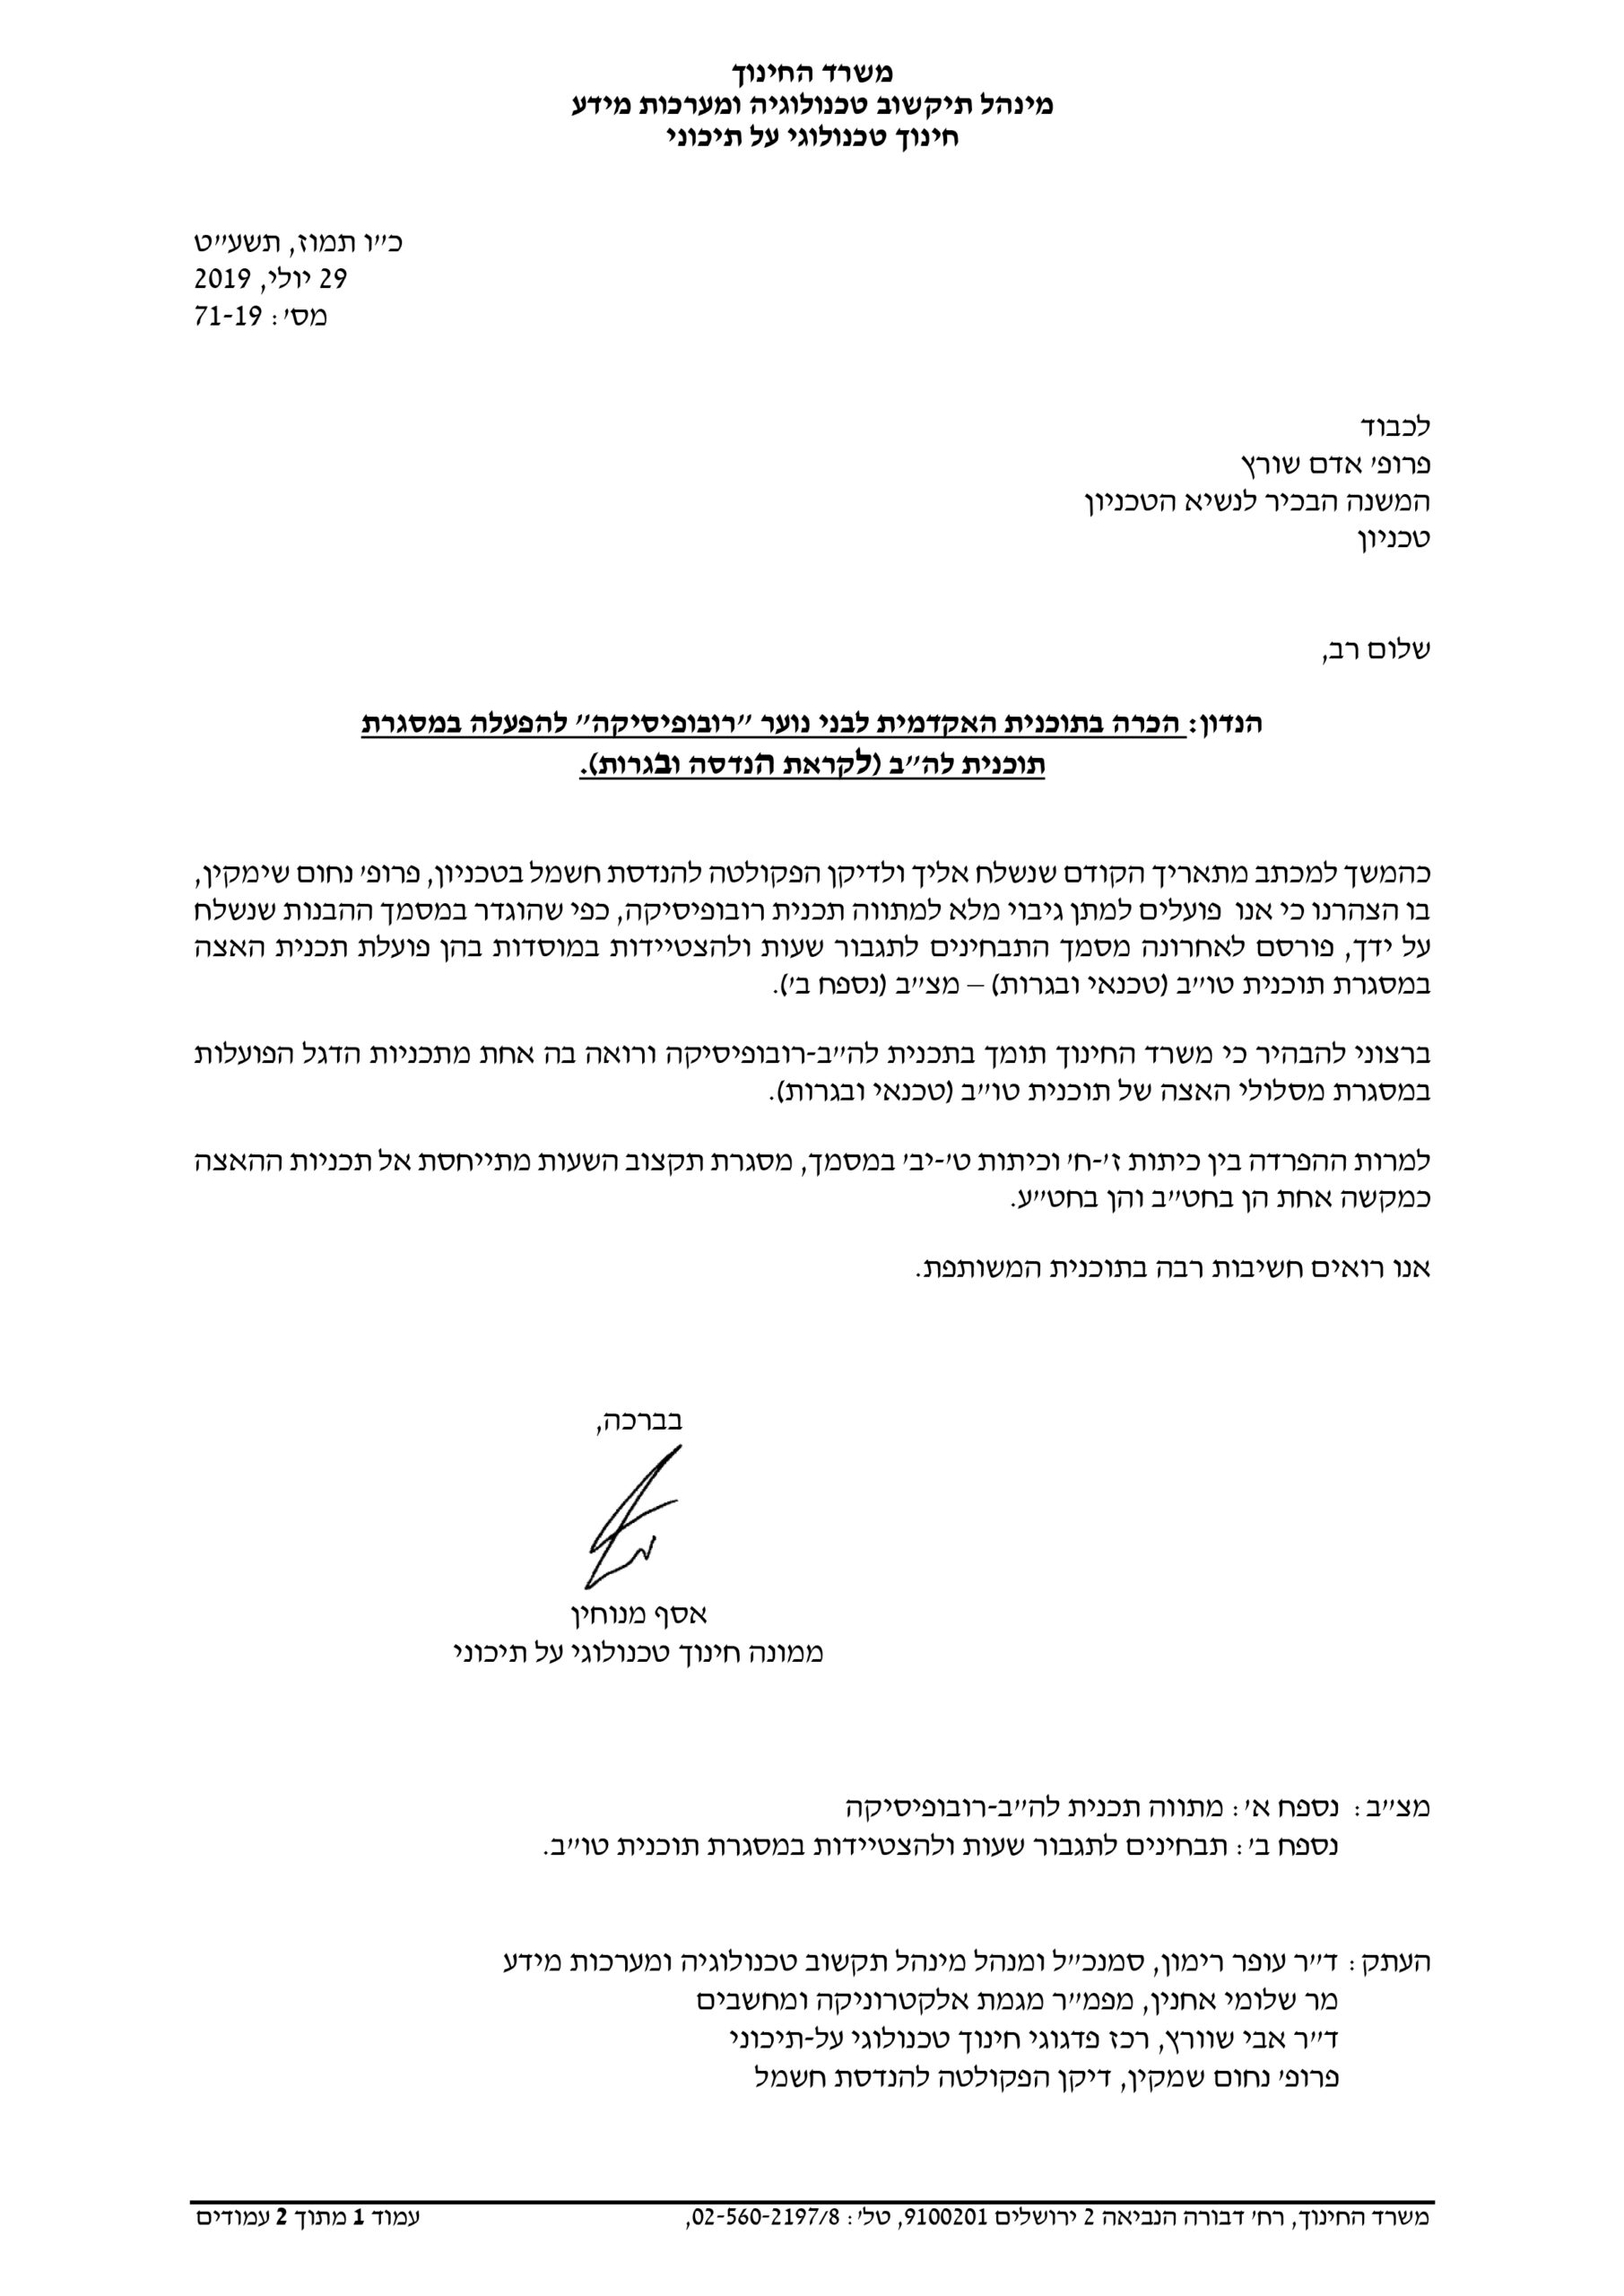 Document of support from the Ministry of Education on the Lahav-Robophysics program as part of the Technician and matriculation program